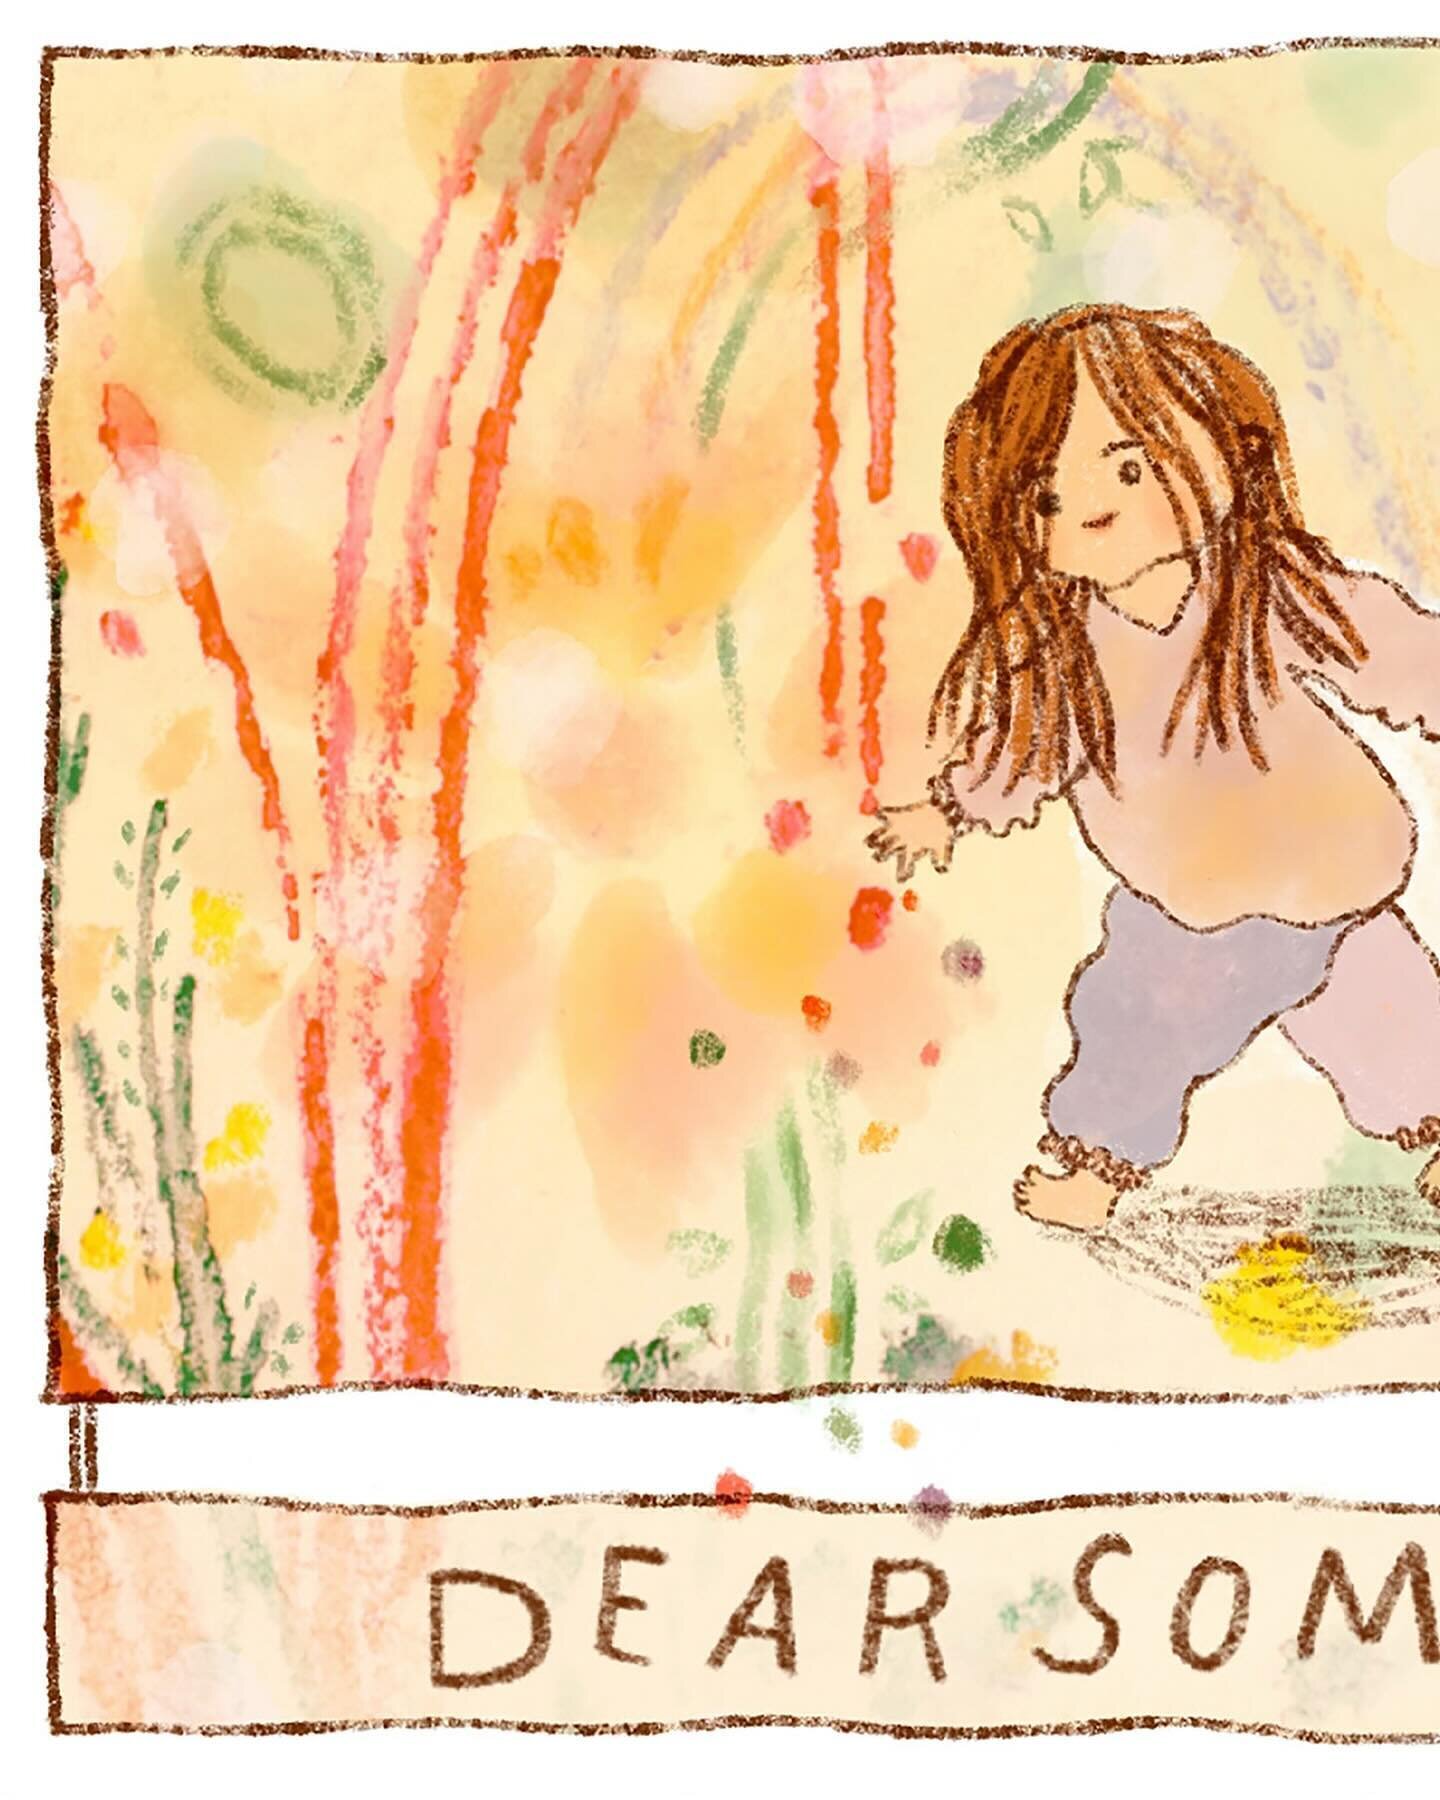 my new welcome banner for Dear Somebody, my weekly newsletter. although i&rsquo;ve been writing for years, i hadn&rsquo;t updated the newsletter&rsquo;s lewk in a long time. this one feels way more right; this one feels like me. ✨ as always, link to 